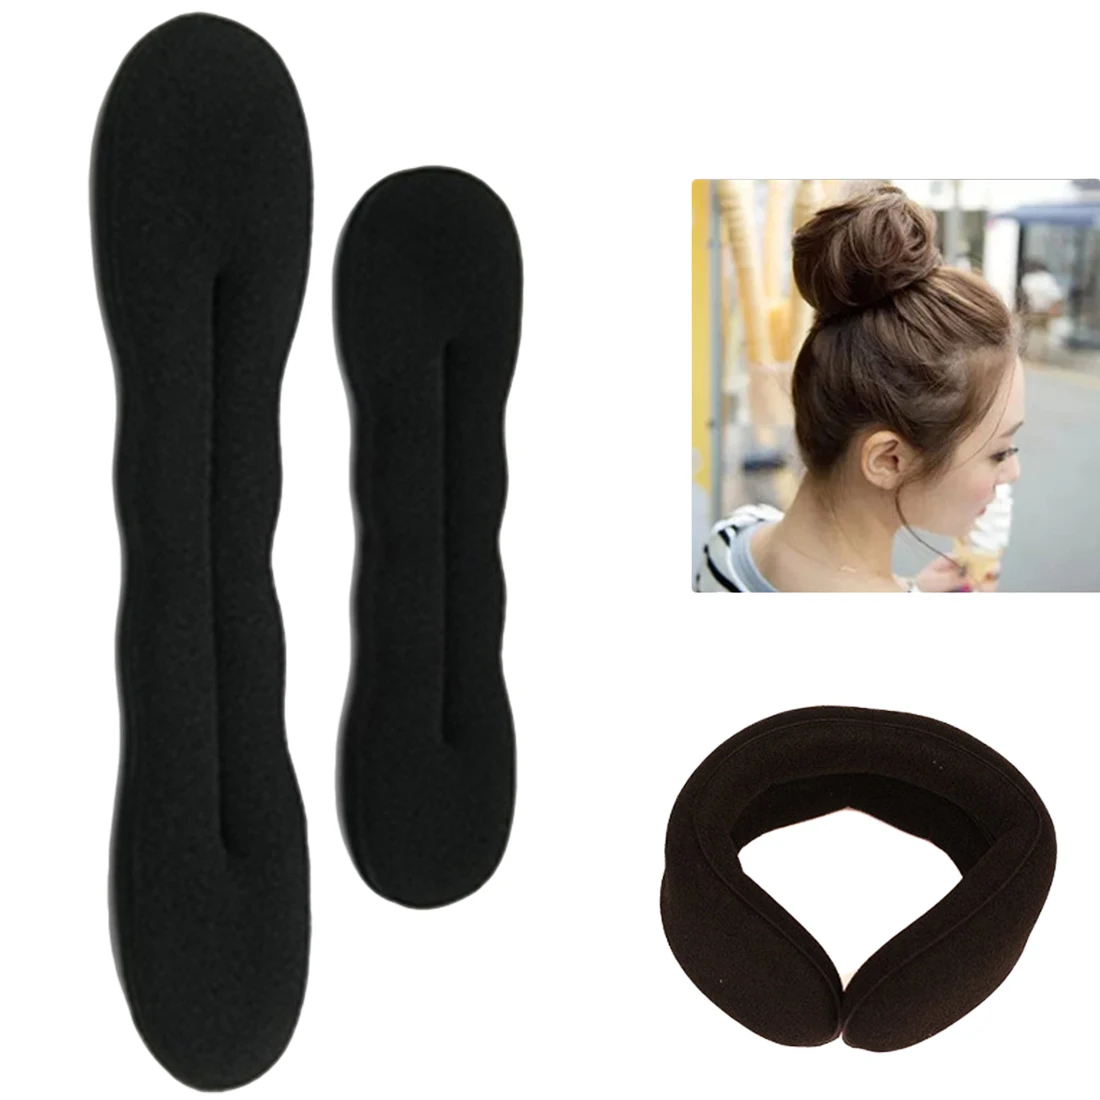 

79PCS Invisible Curly Wavy Clips Sponge Donut Hair Bun Braiding Tool Black Rubber Rope Scrunchy Hairpins Hair Beauty Tools Set